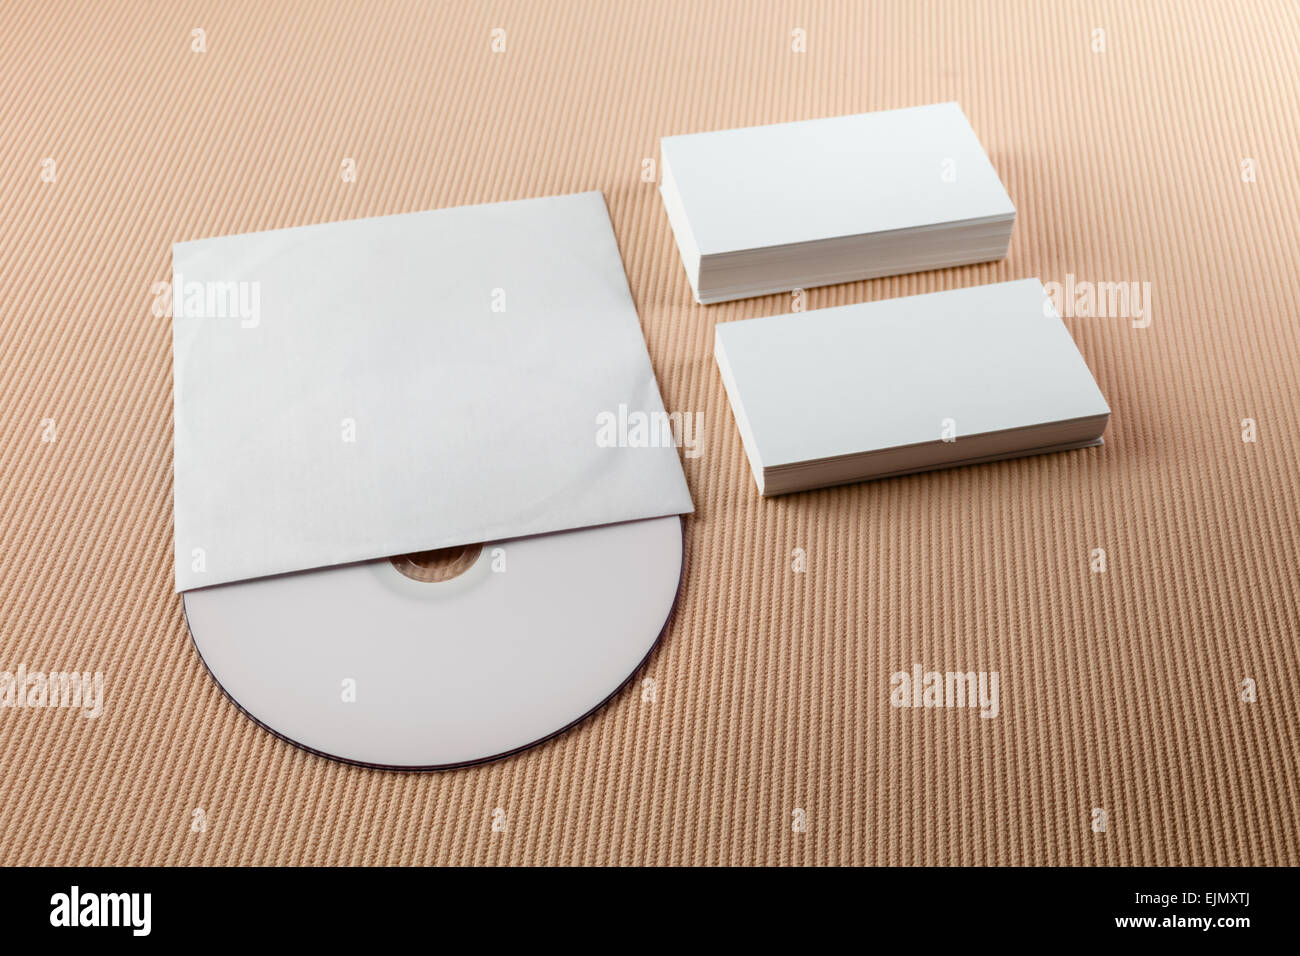 Blank business cards and CD on a beige striped background. Template for branding identity. Stock Photo